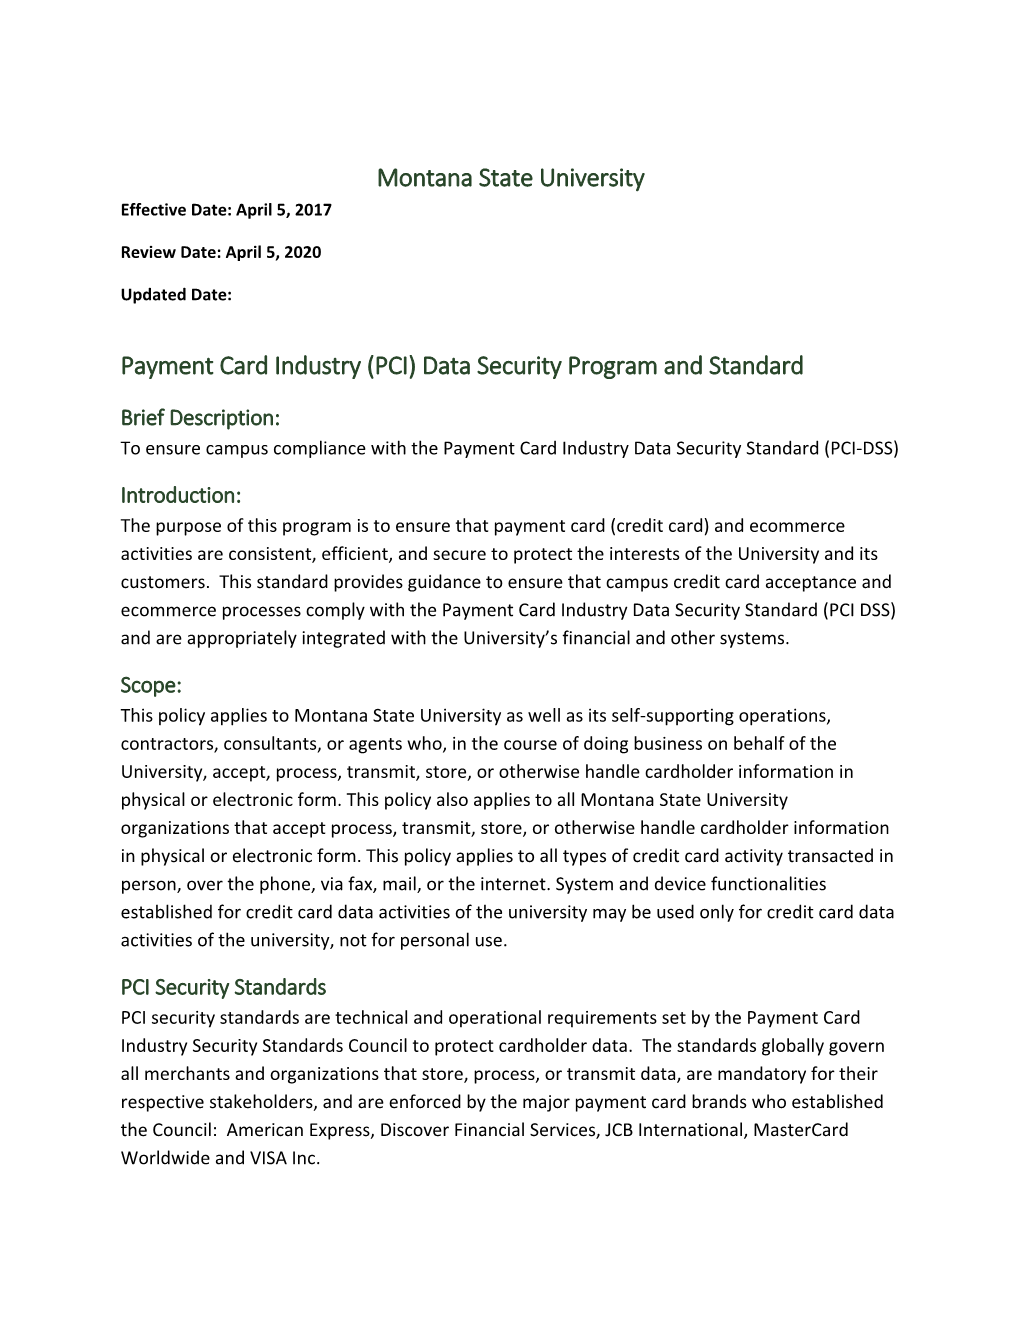 Payment Card Industry Data Security Program Standard